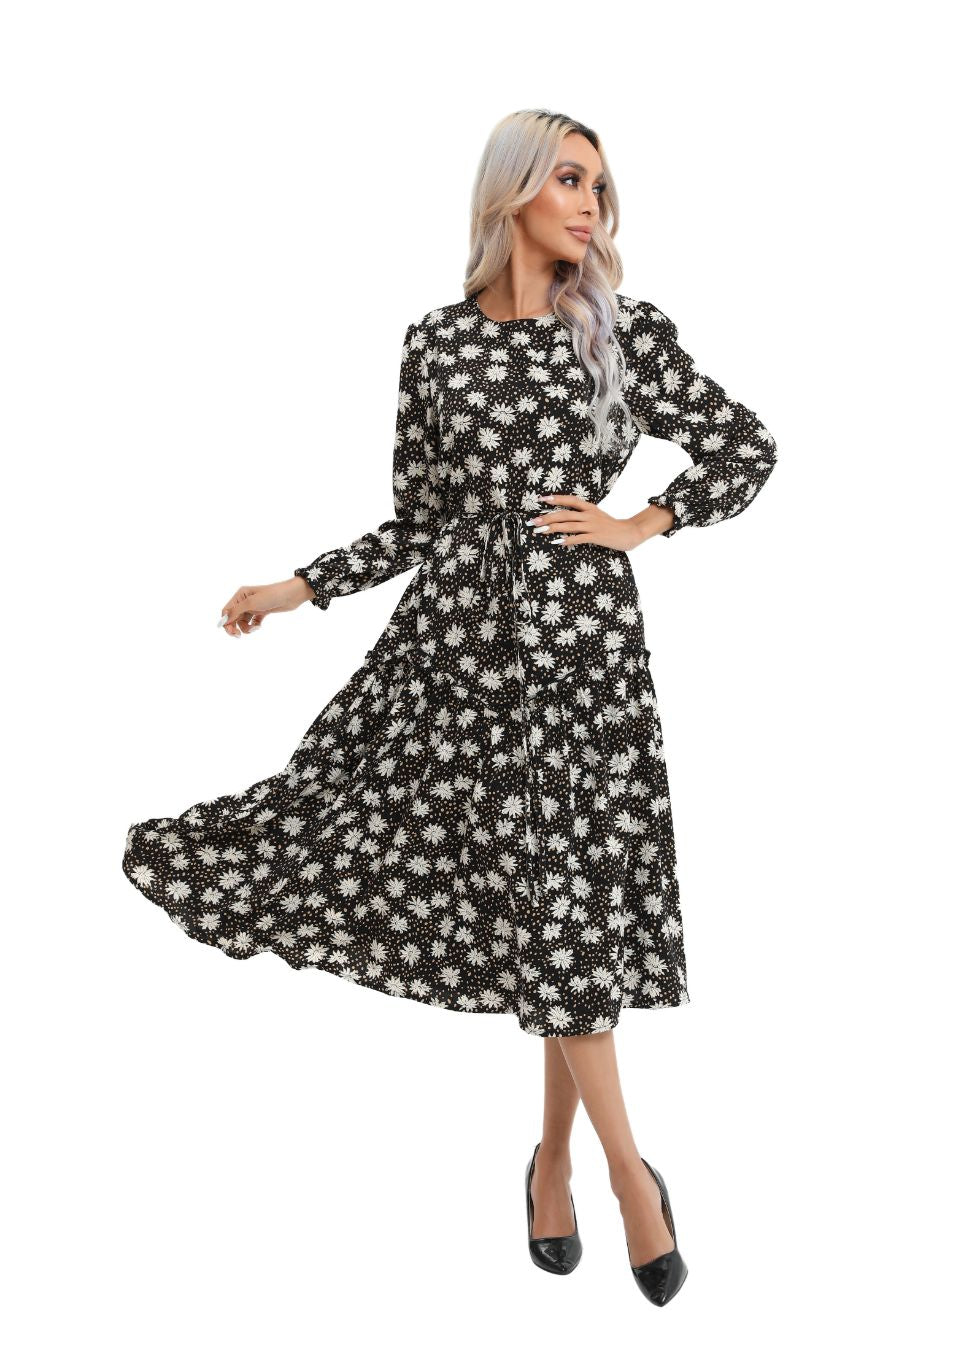 Modest Floral Midi Dress with Light Front Tie - alamaud